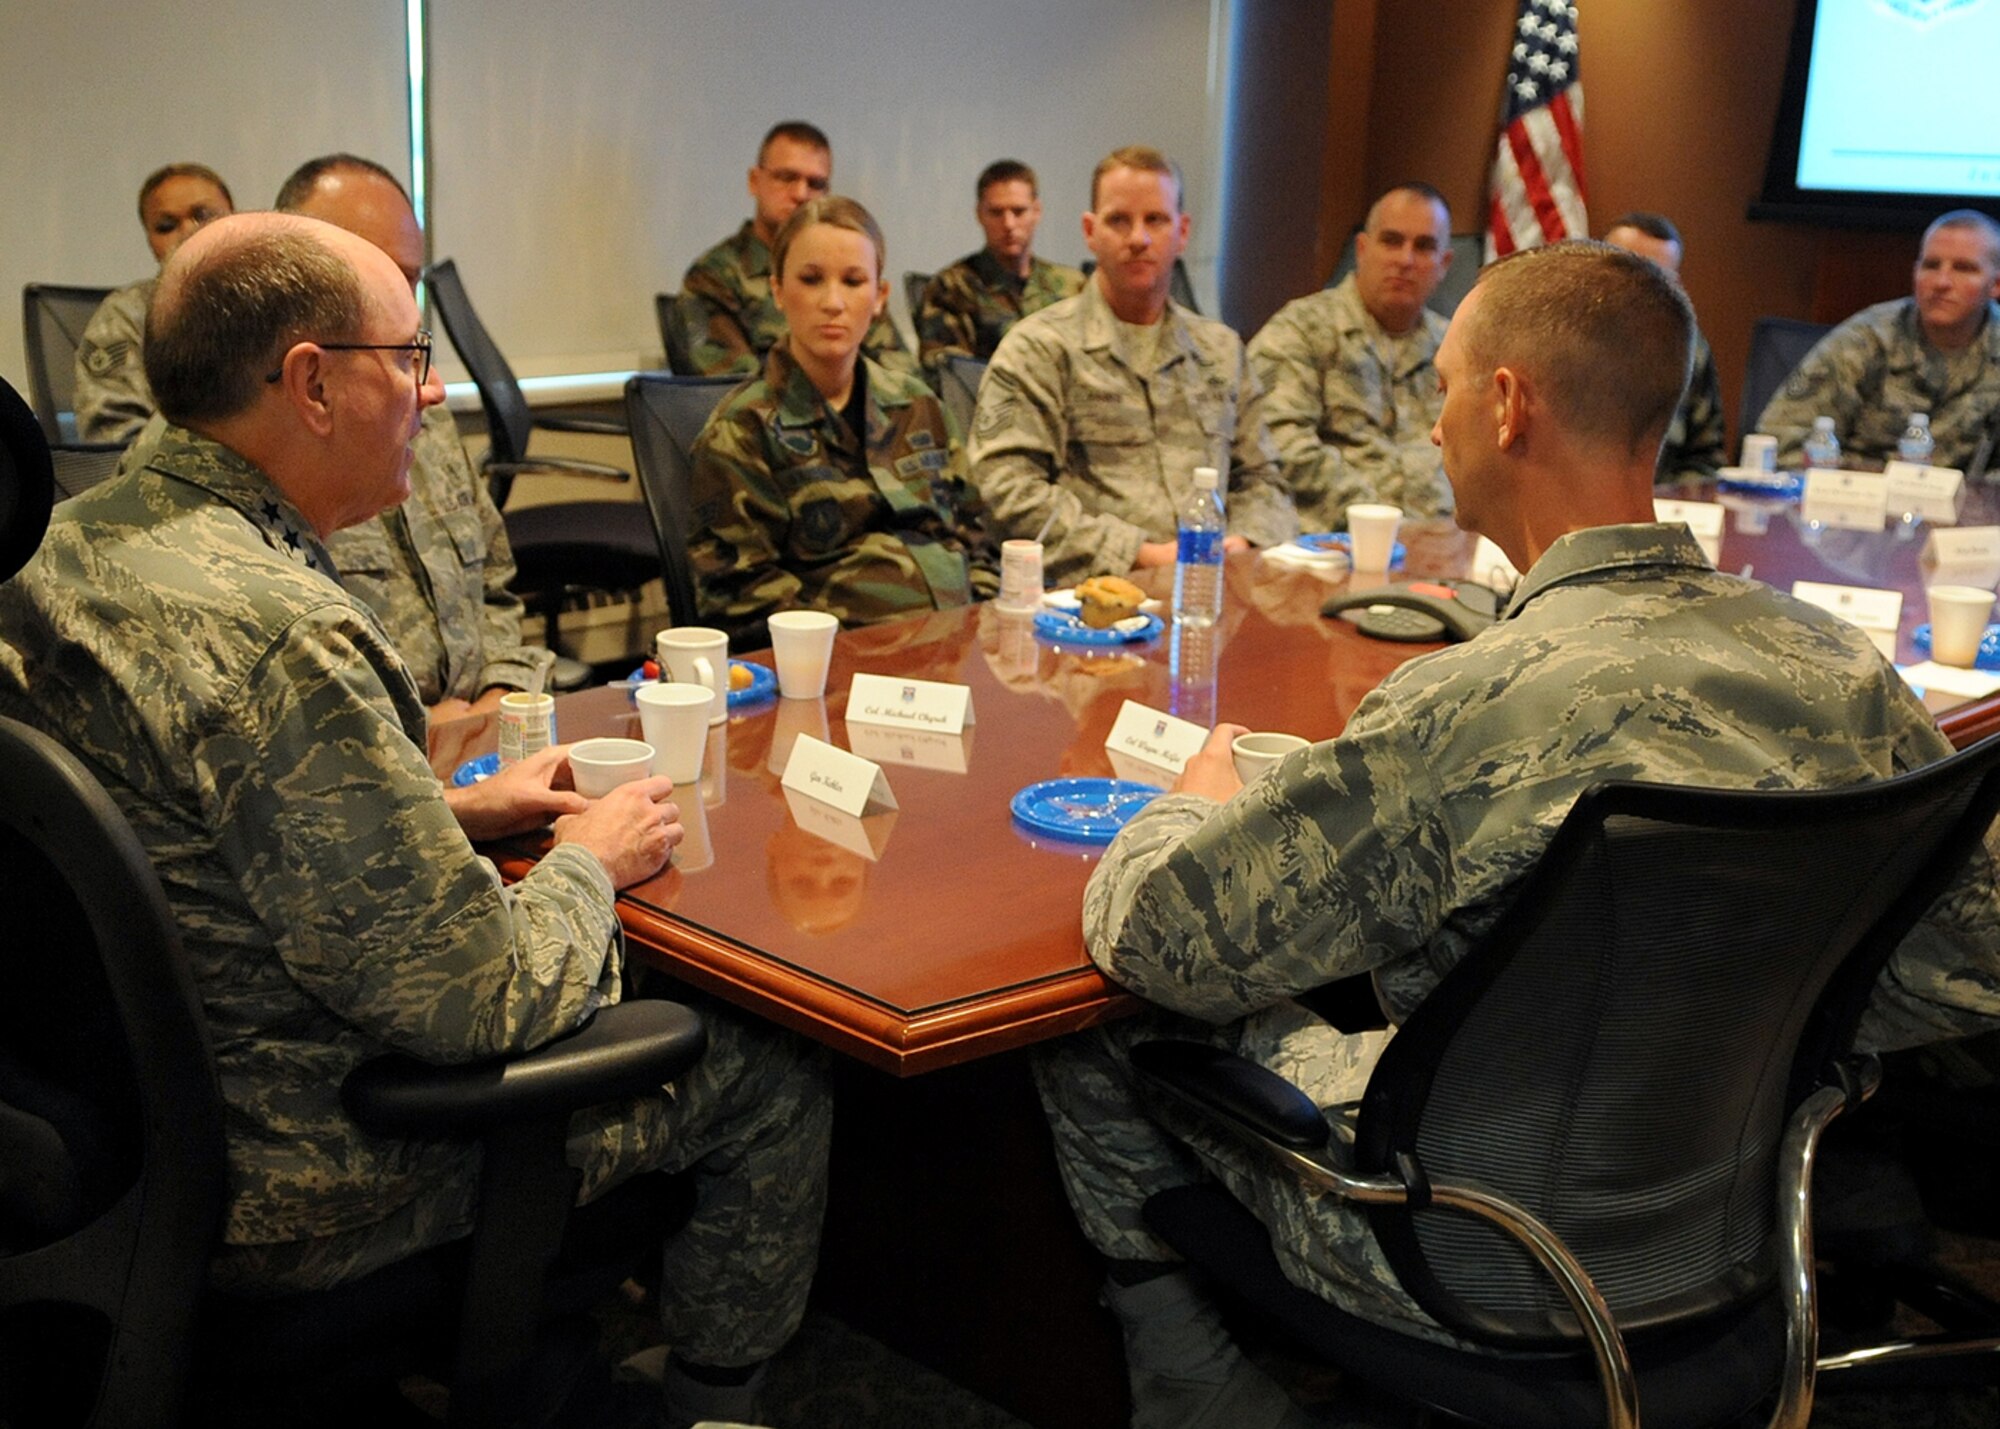 BUCKLEY AIR FORCE BASE, Colo. -- Gen. C. Robert Kehler, Air Force Space Command commander, visits with some of the base's enlisted professional performers and senior noncommissioned officers during a breakfast get-together to discuss enlisted leadership. General Kehler spent Aug. 19 and 20 on the base visiting work centers for the first time since taking command of AFSPC in October 2007. (U.S. Air Force photo by Senior Airman Steven Czyz)